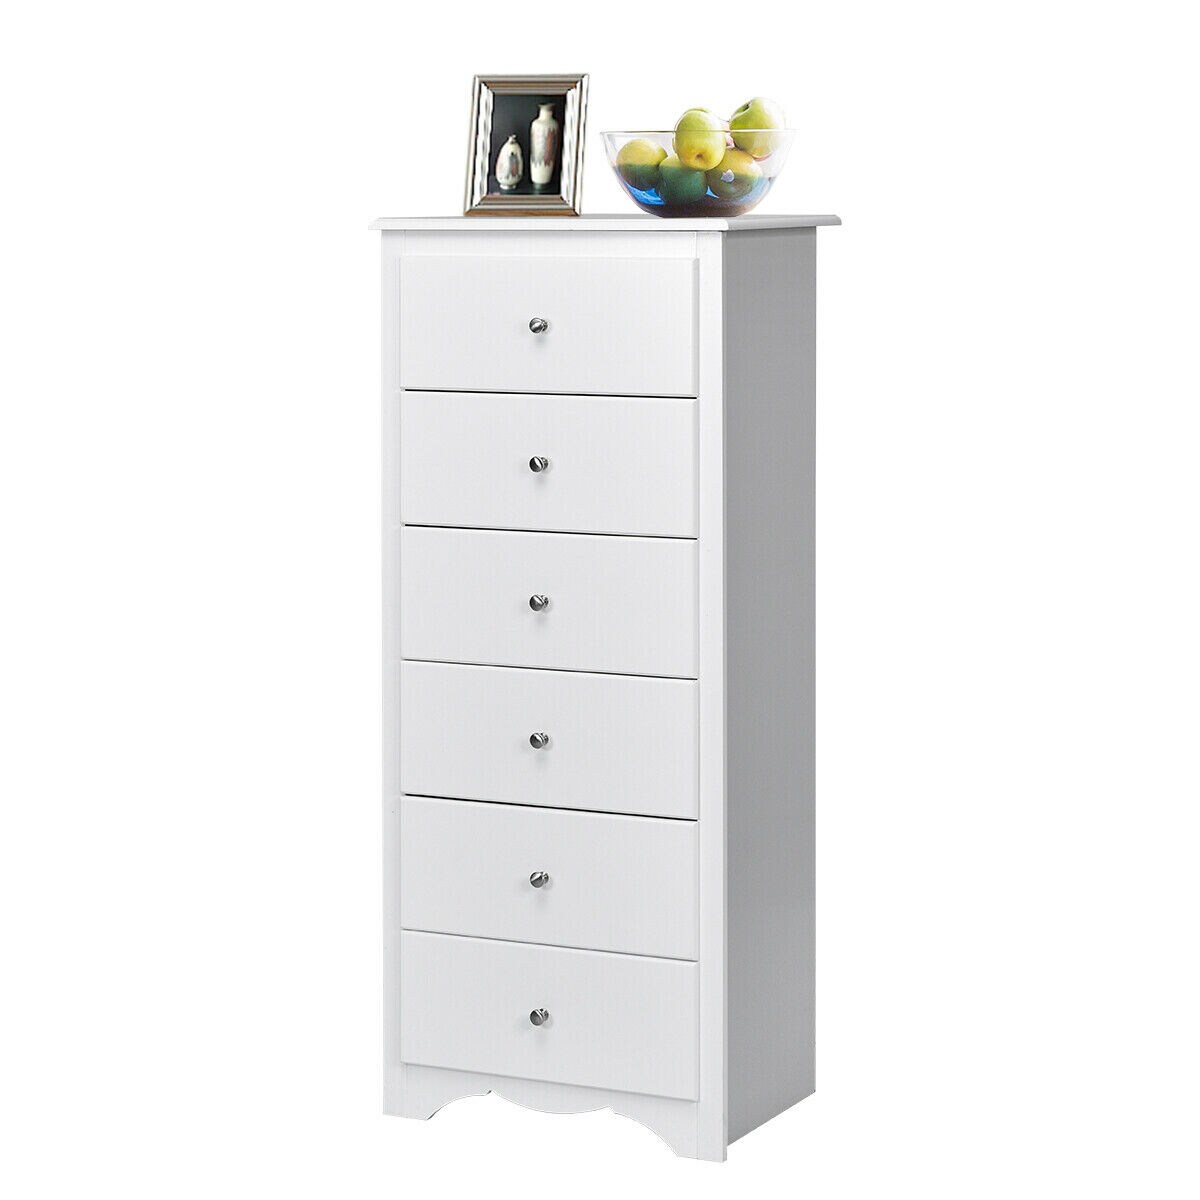 Gymax 6 Drawer Chest Dresser Clothes Storage Bedroom Tall Furniture Cabinet White